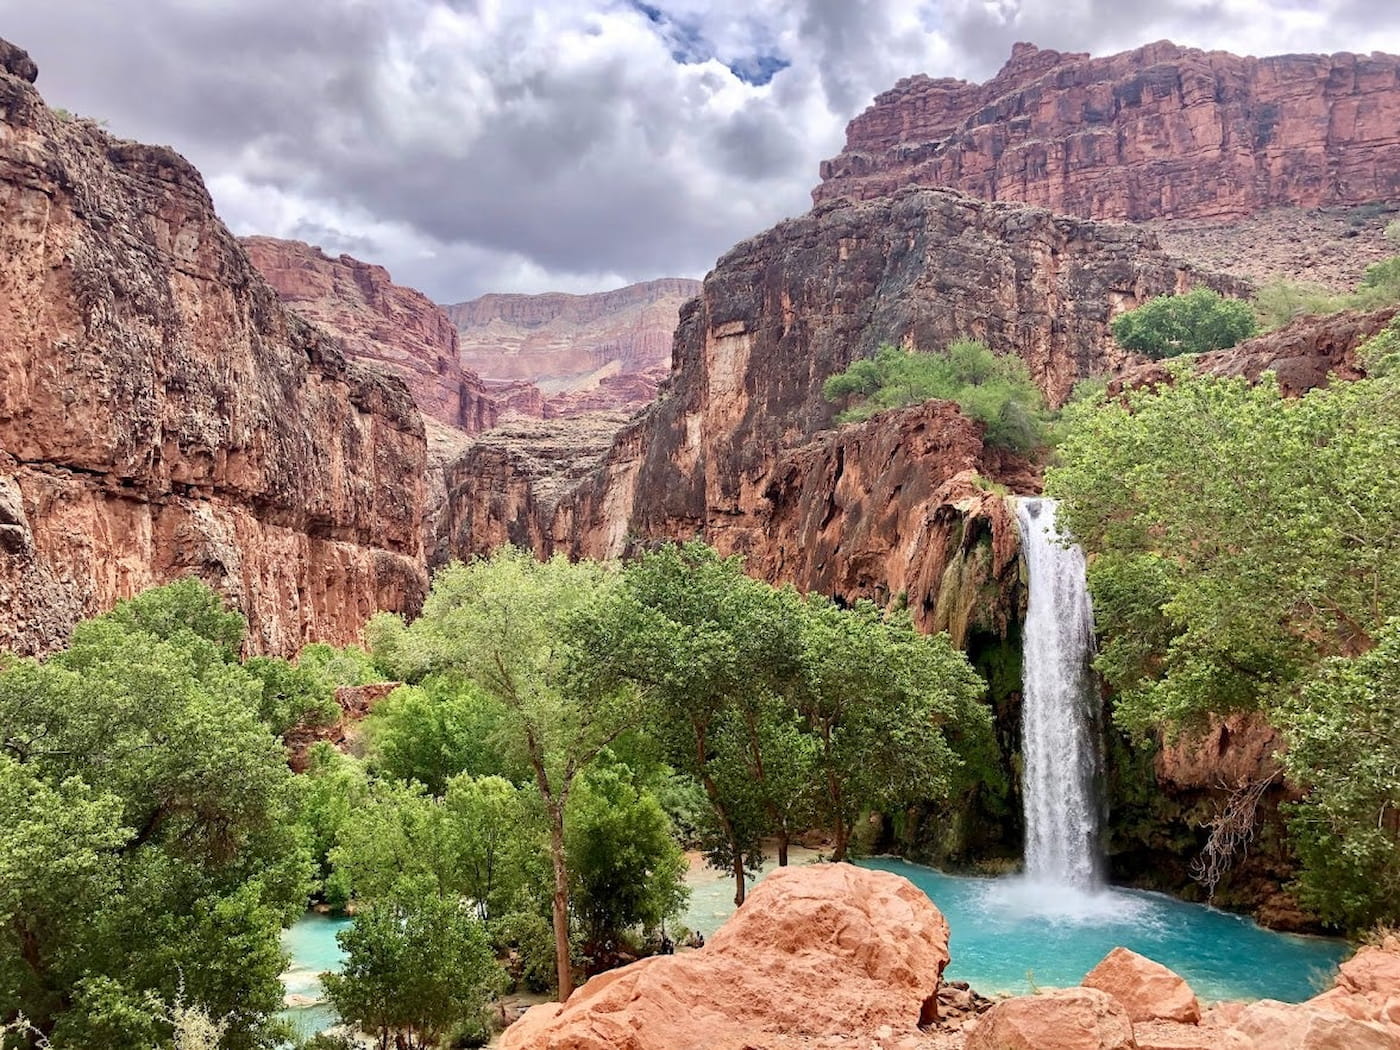 Turquoise waterfall cascading over the red rocks of the iconic Havasu Falls at the Havasu Falls campground.